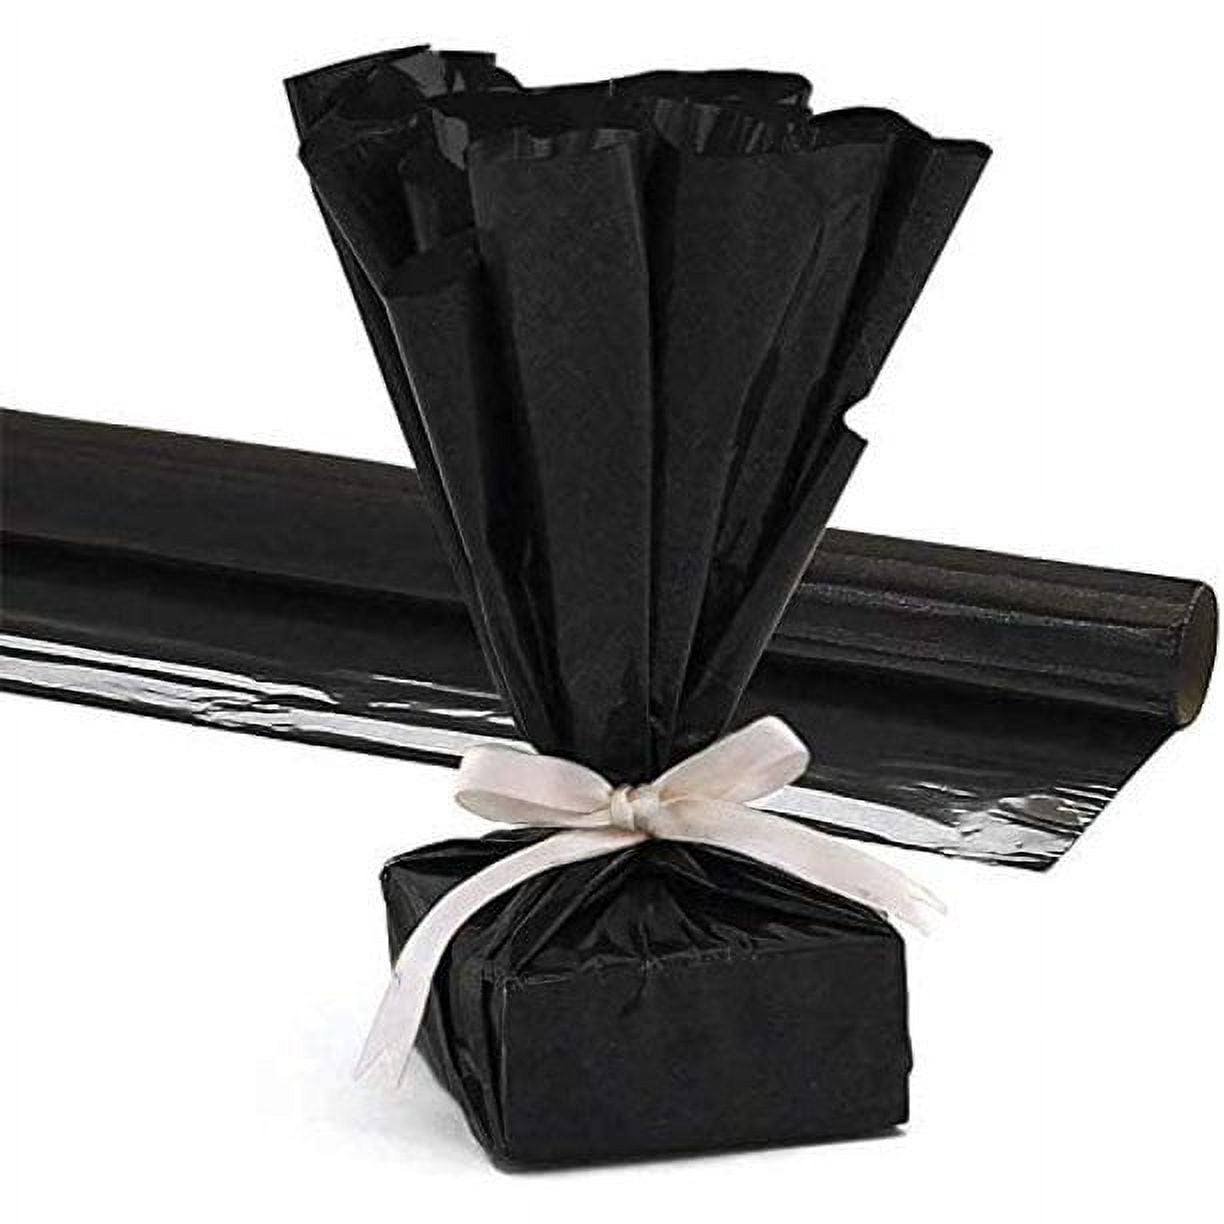 HolyMaji 100 Sheets Black Thank You Tissue Paper 20 x 14 Metallic Silver  Tissue Paper for Gift Bags Bulk Wrapping for Graduation Birthday Party  Favor